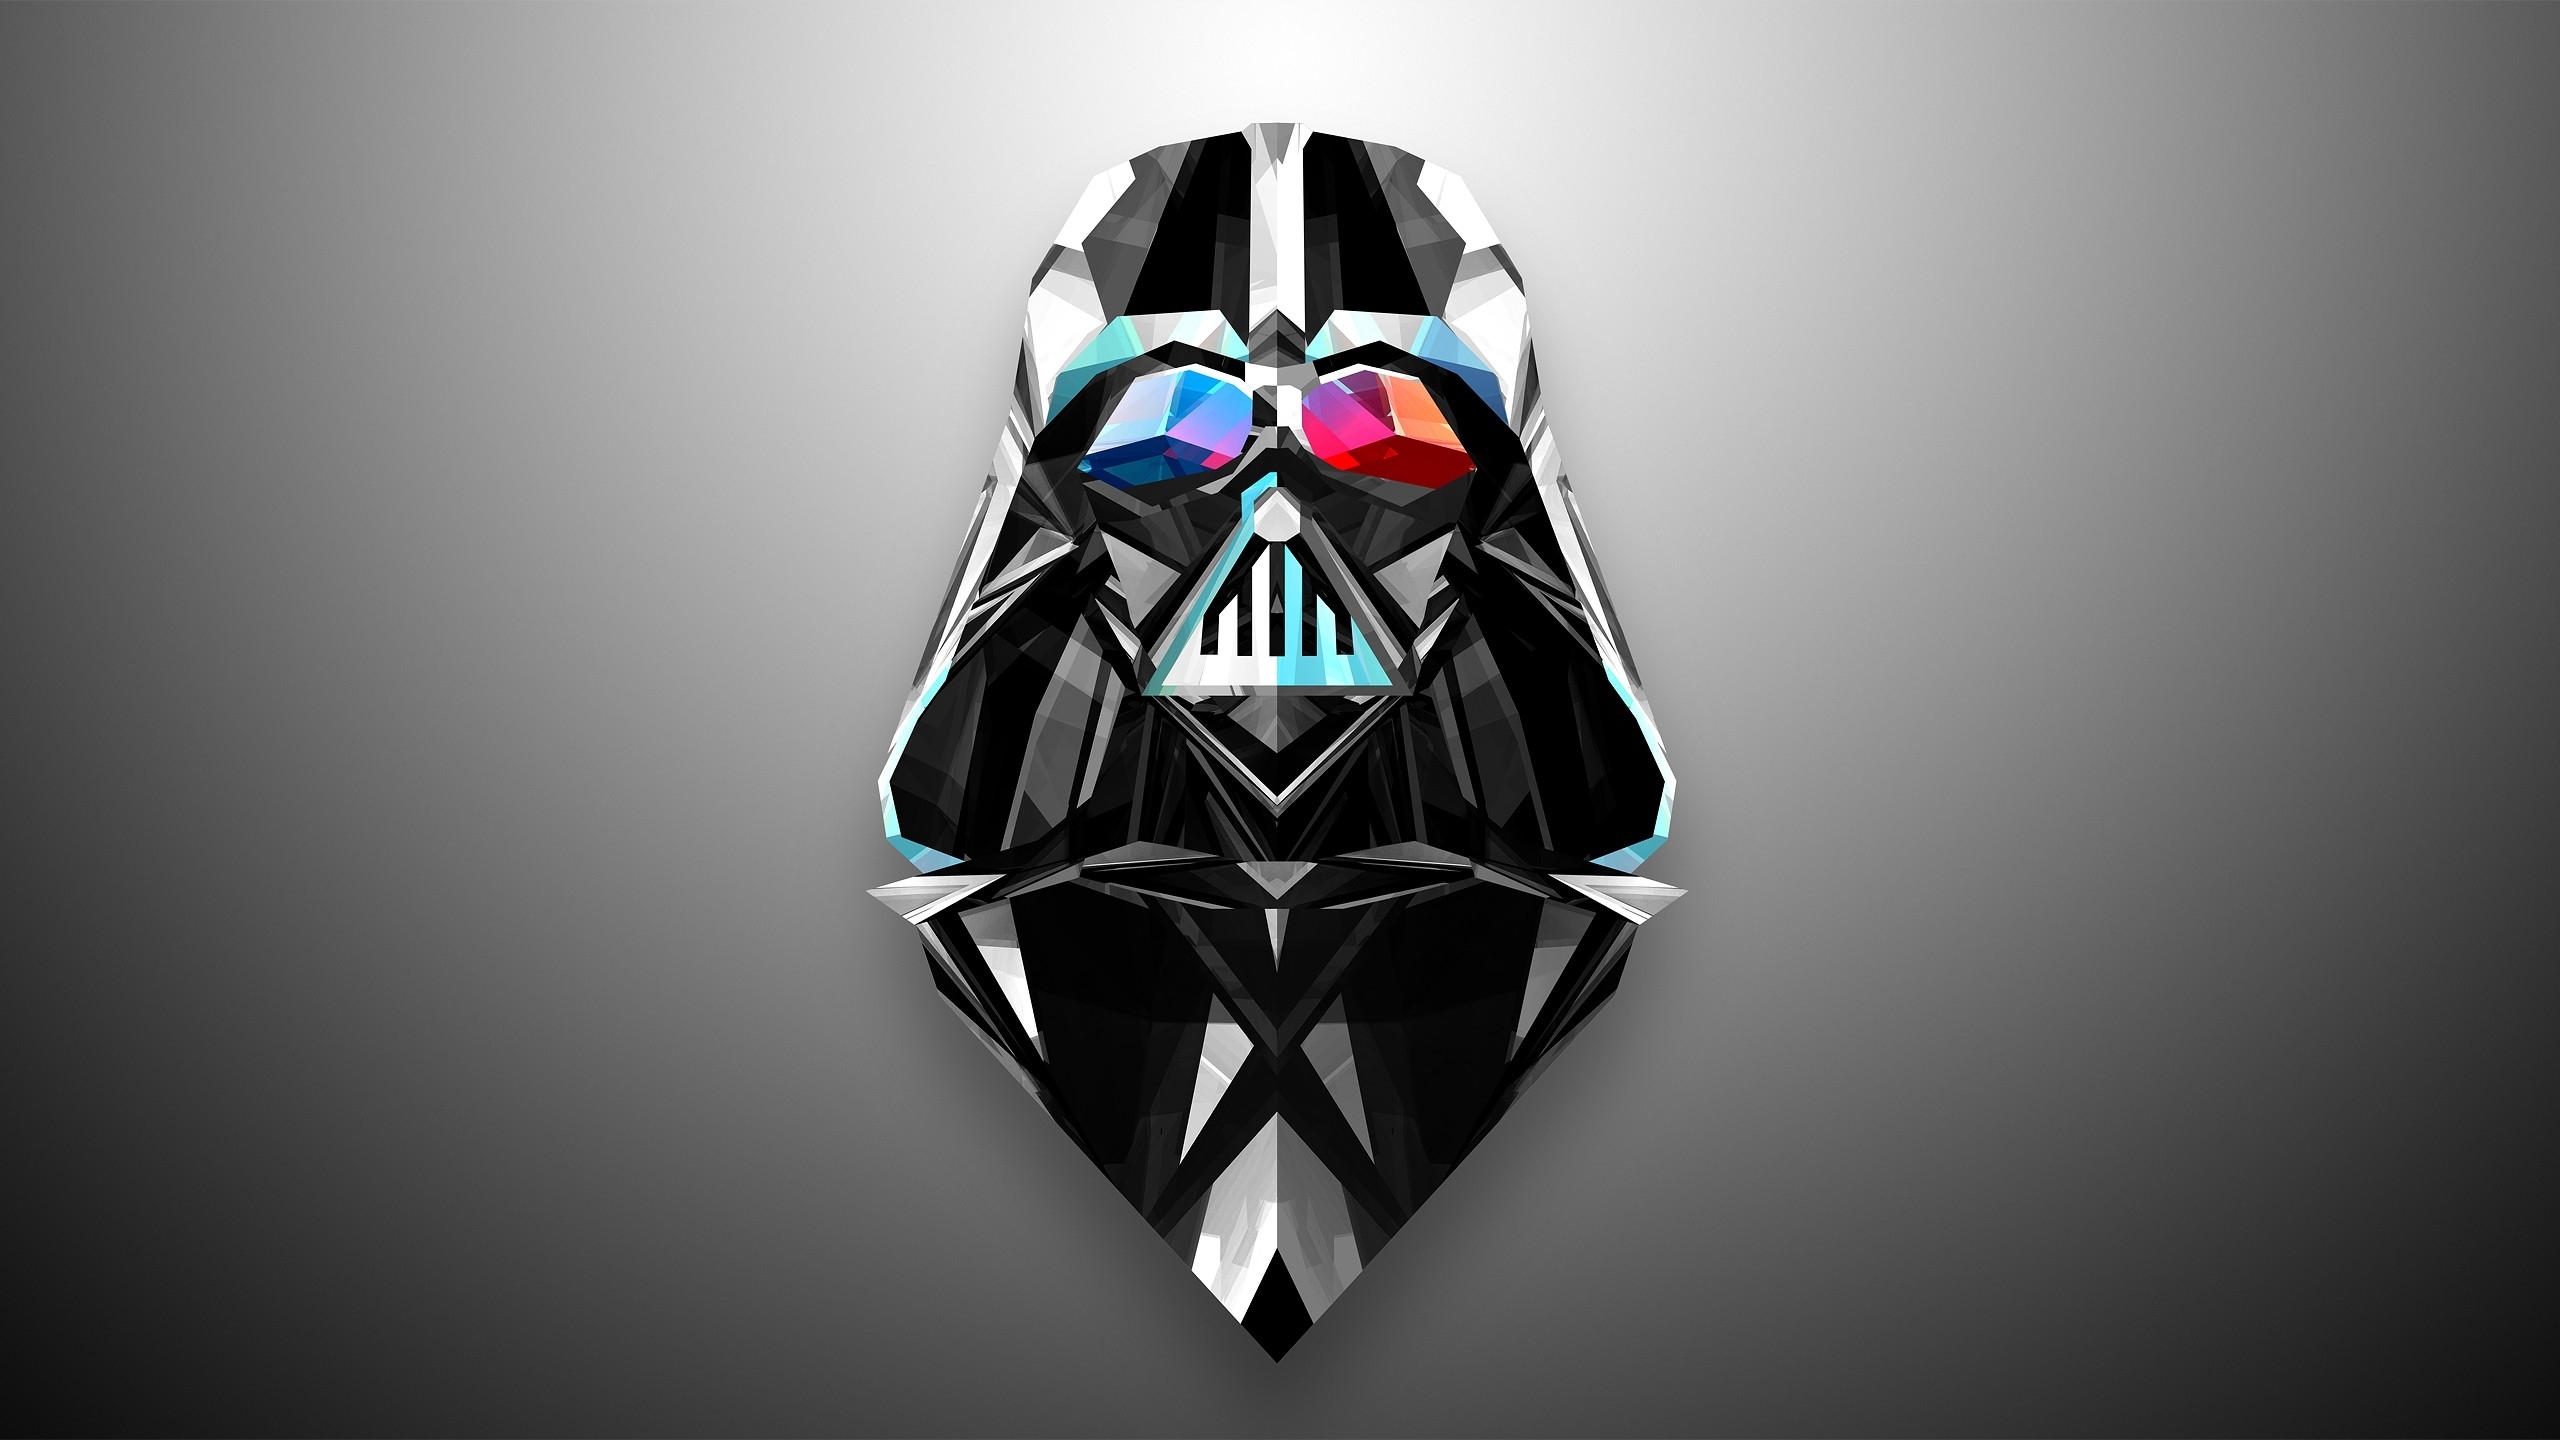 10 Latest Cool Star Wars Backgrounds Hd FULL HD 1080p For PC Desktop 2023